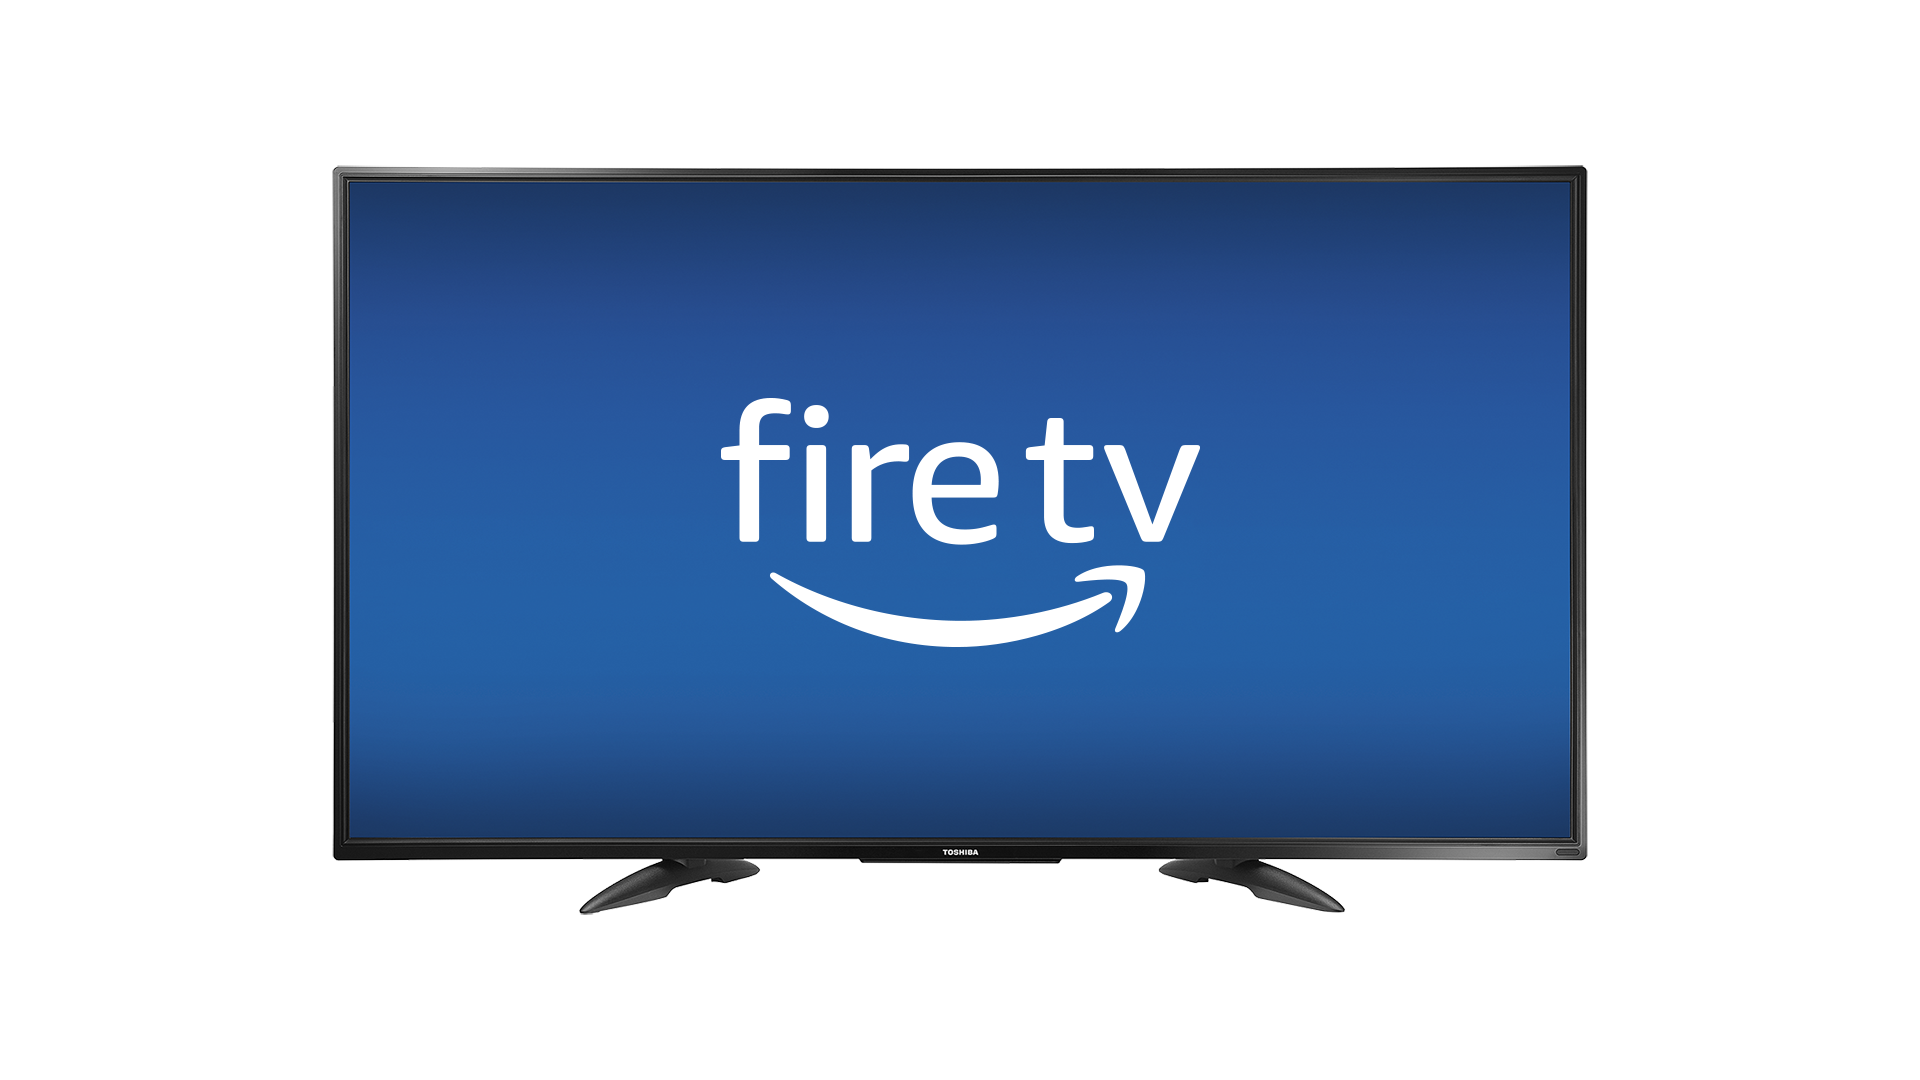 https://www.dolby.com/siteassets/xf-products/tvs/toshiba-fire-tv/fire-tv-front-firetvfill-primary.png